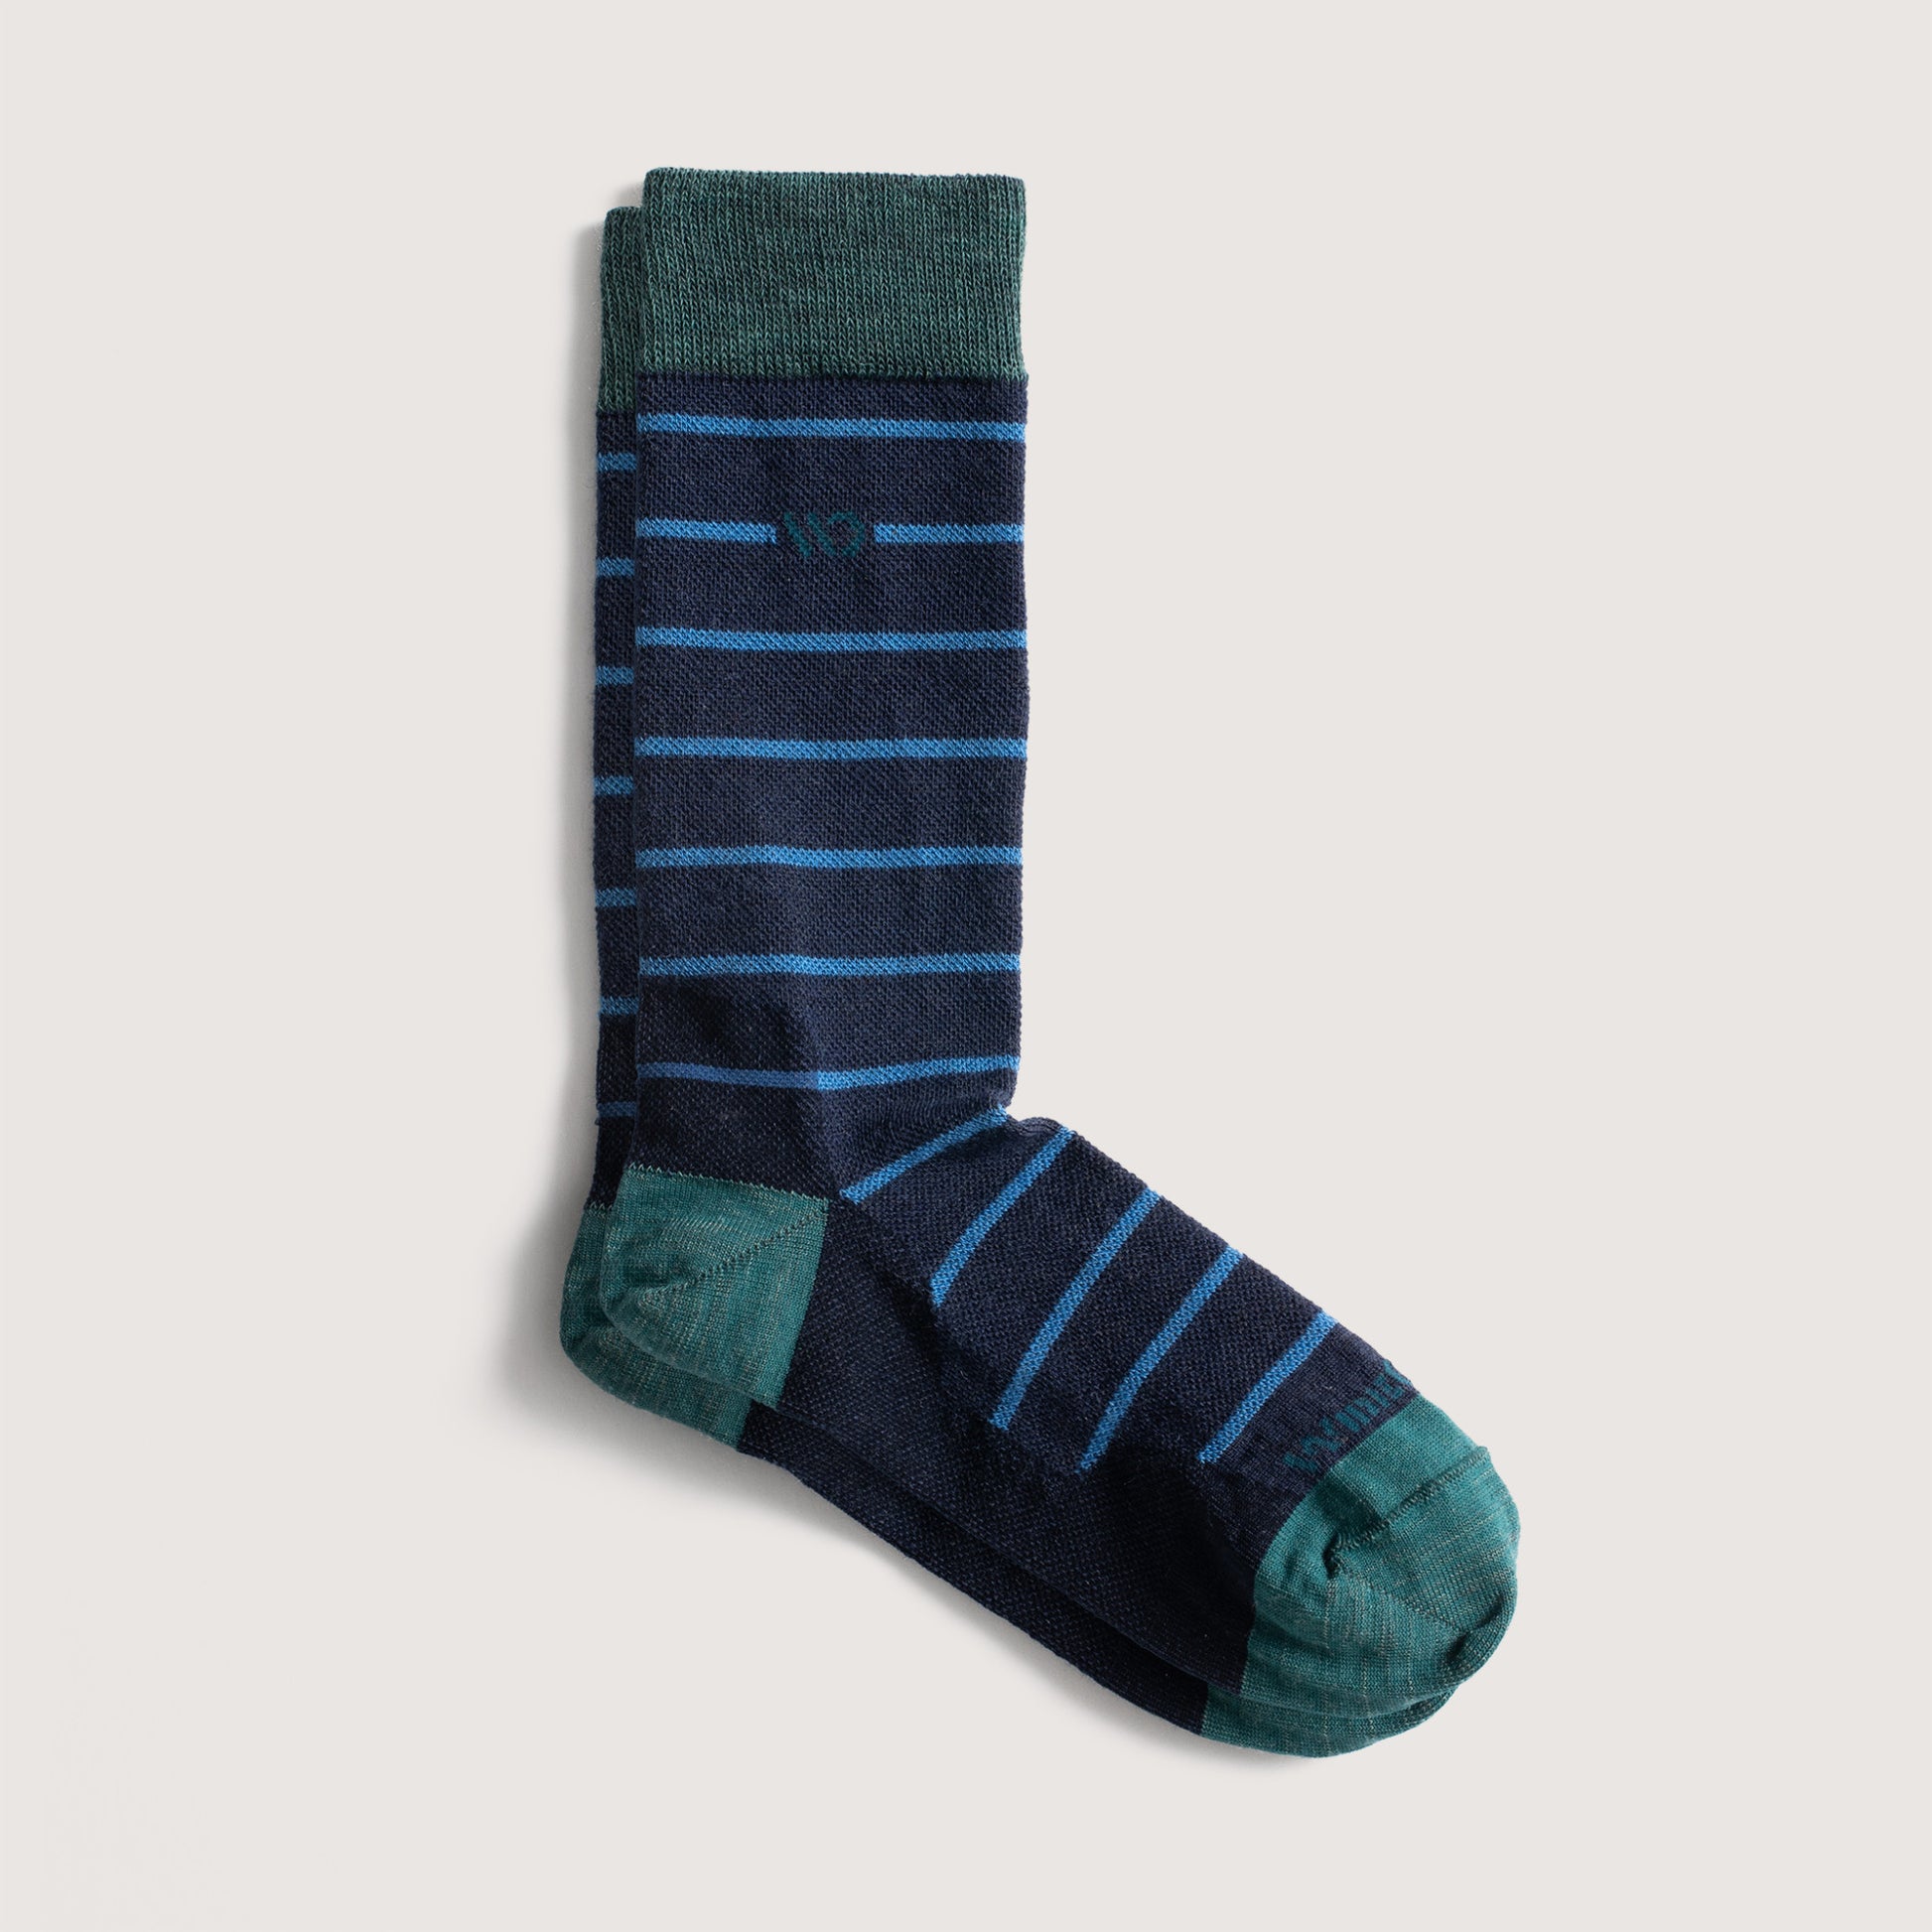 Crew sock with dark teal heel/toe and logo, with Denim body and blue stripes --Denim